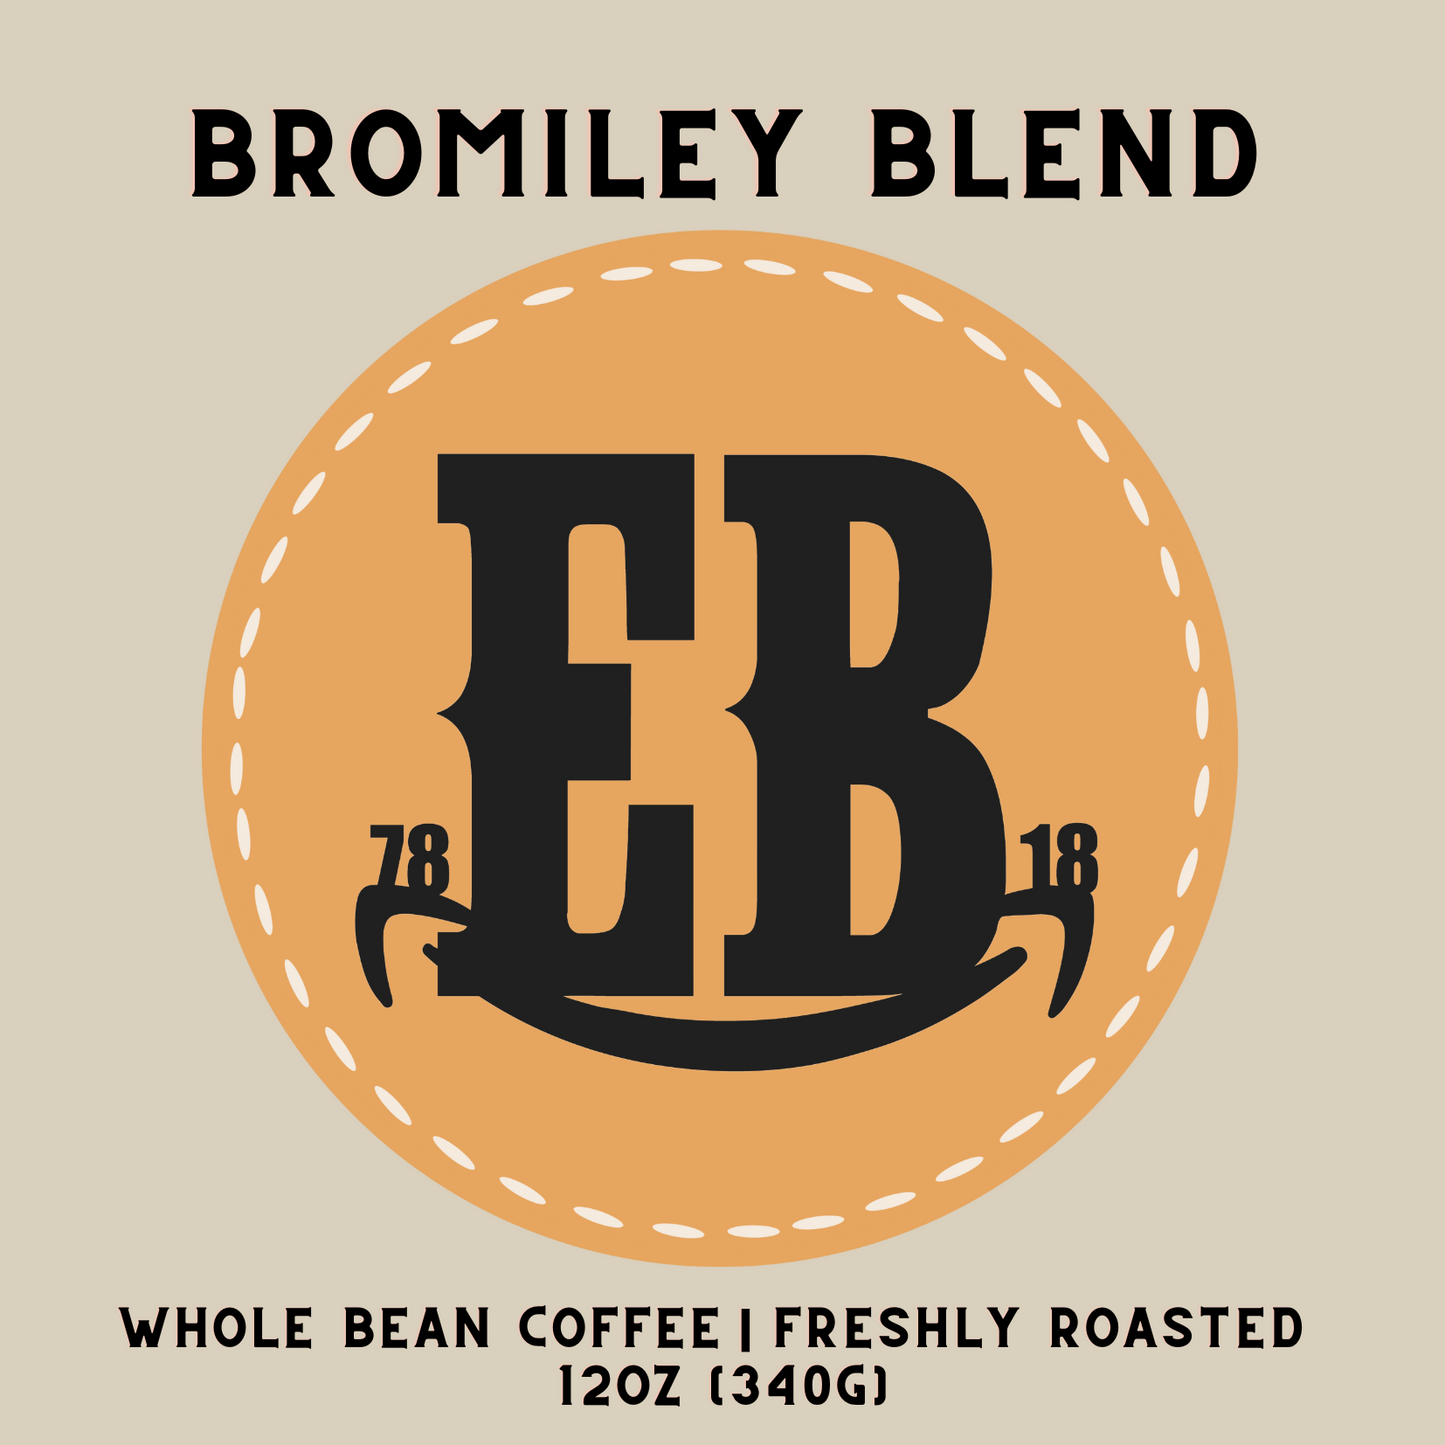 The Bromiley Blend